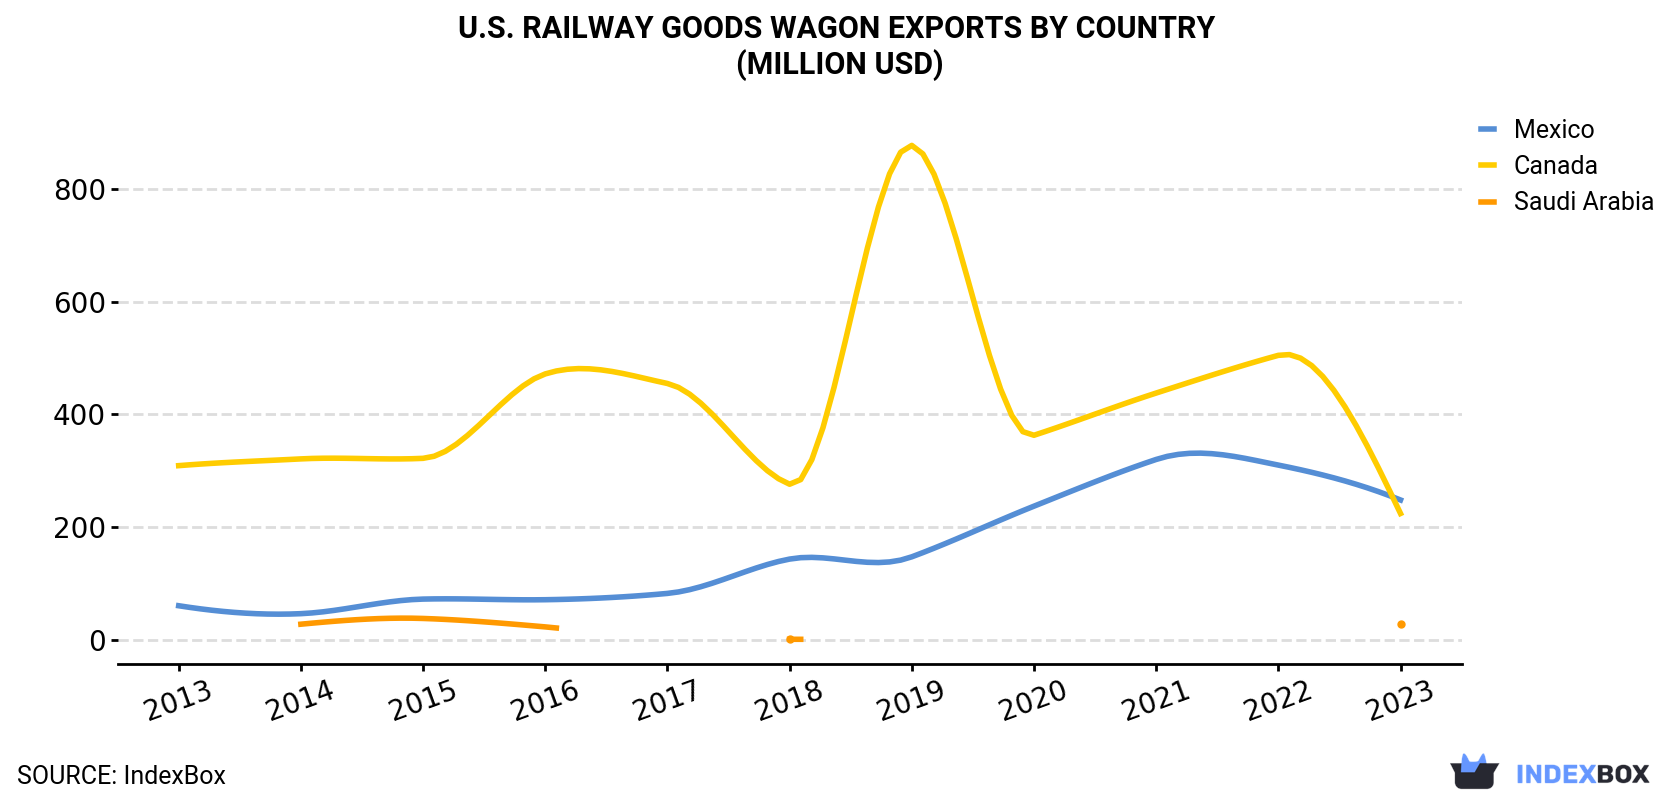 U.S. Railway Goods Wagon Exports By Country (Million USD)